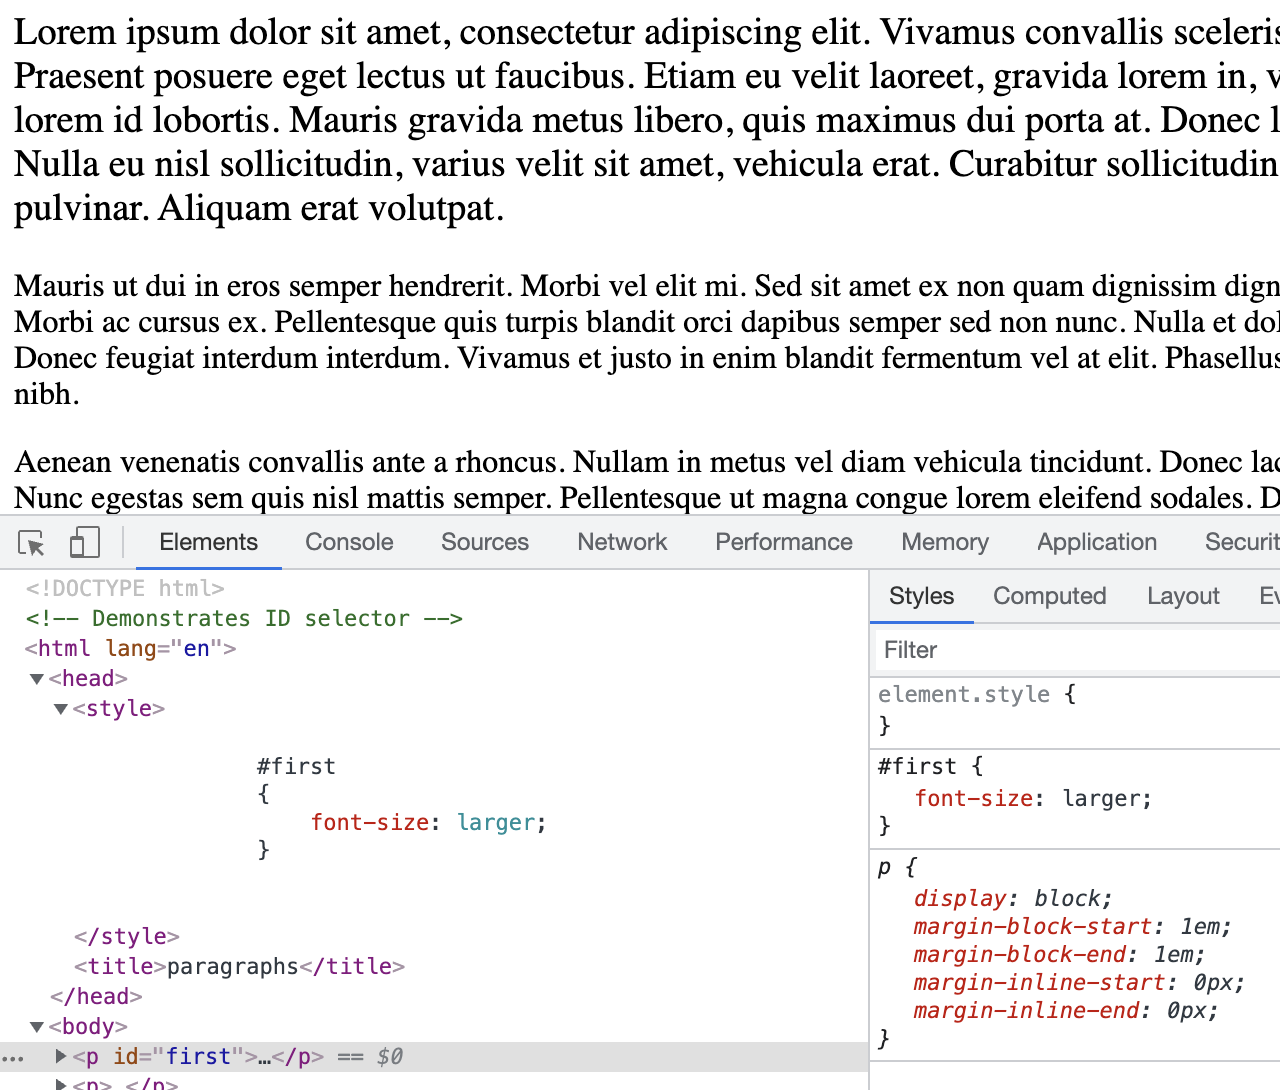 Page with Elements tab showing source code of paragraphs1.html